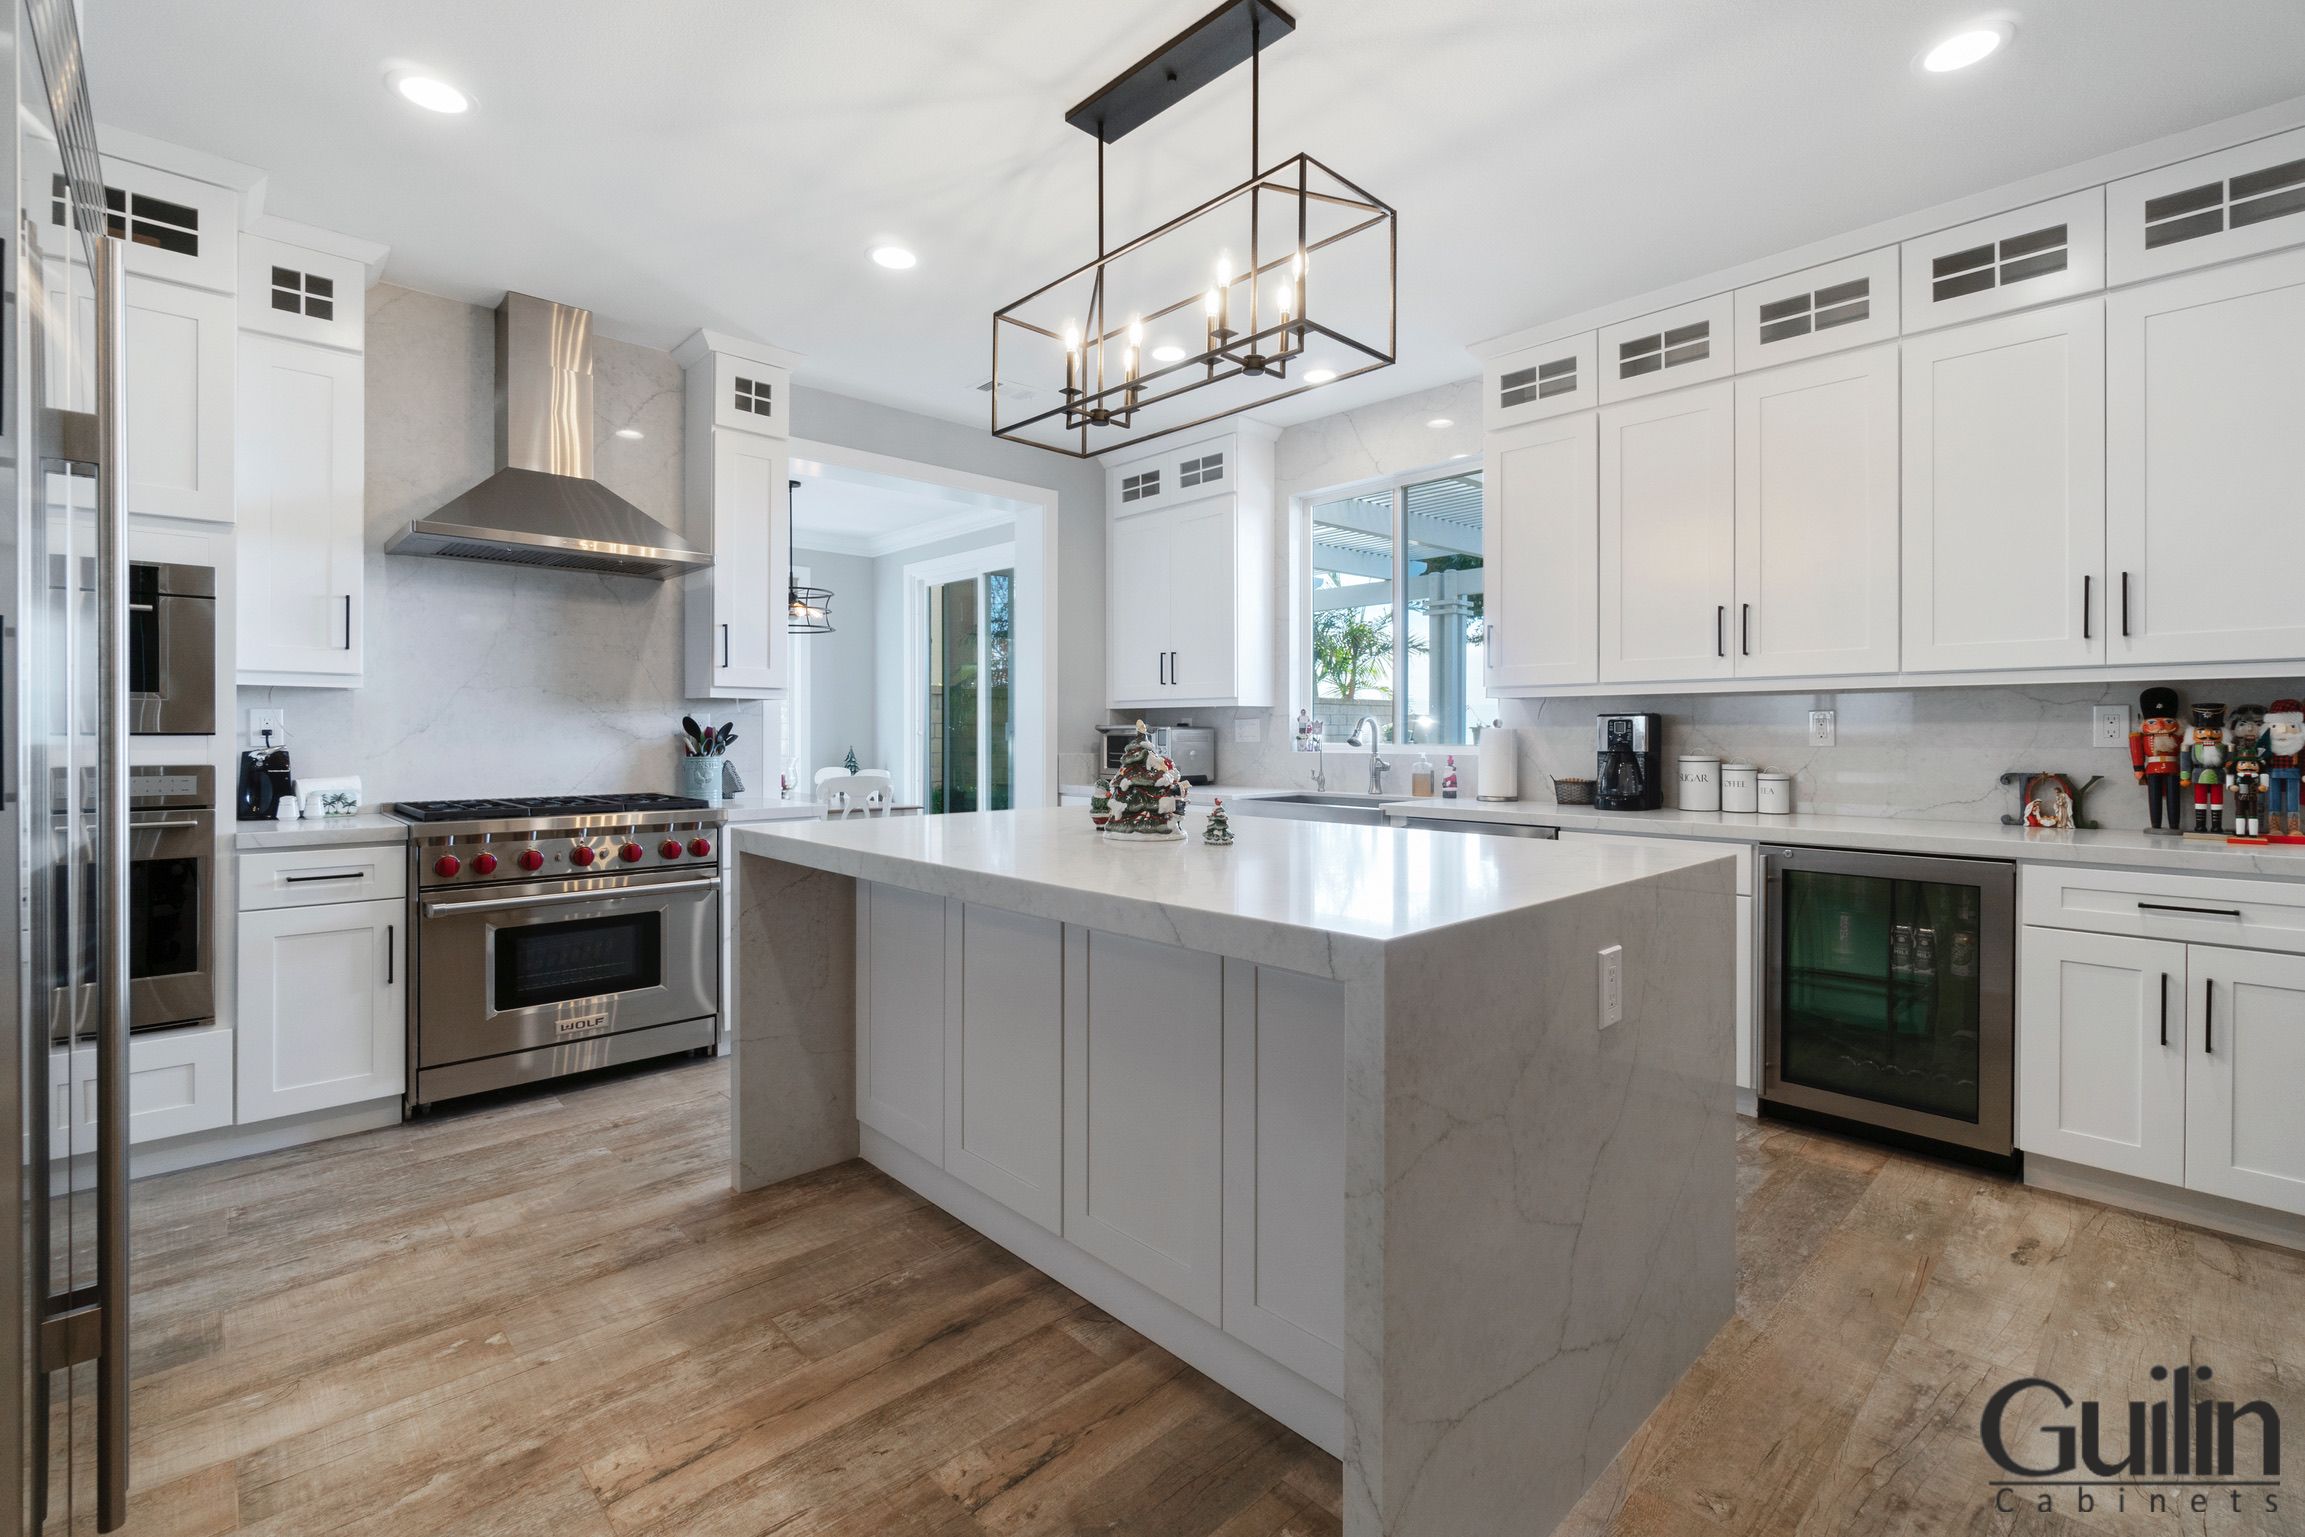 Grey kitchen cabinets, paired with off-white walls and light grey or white countertops, is a popular combination that trending and many homeowners love.